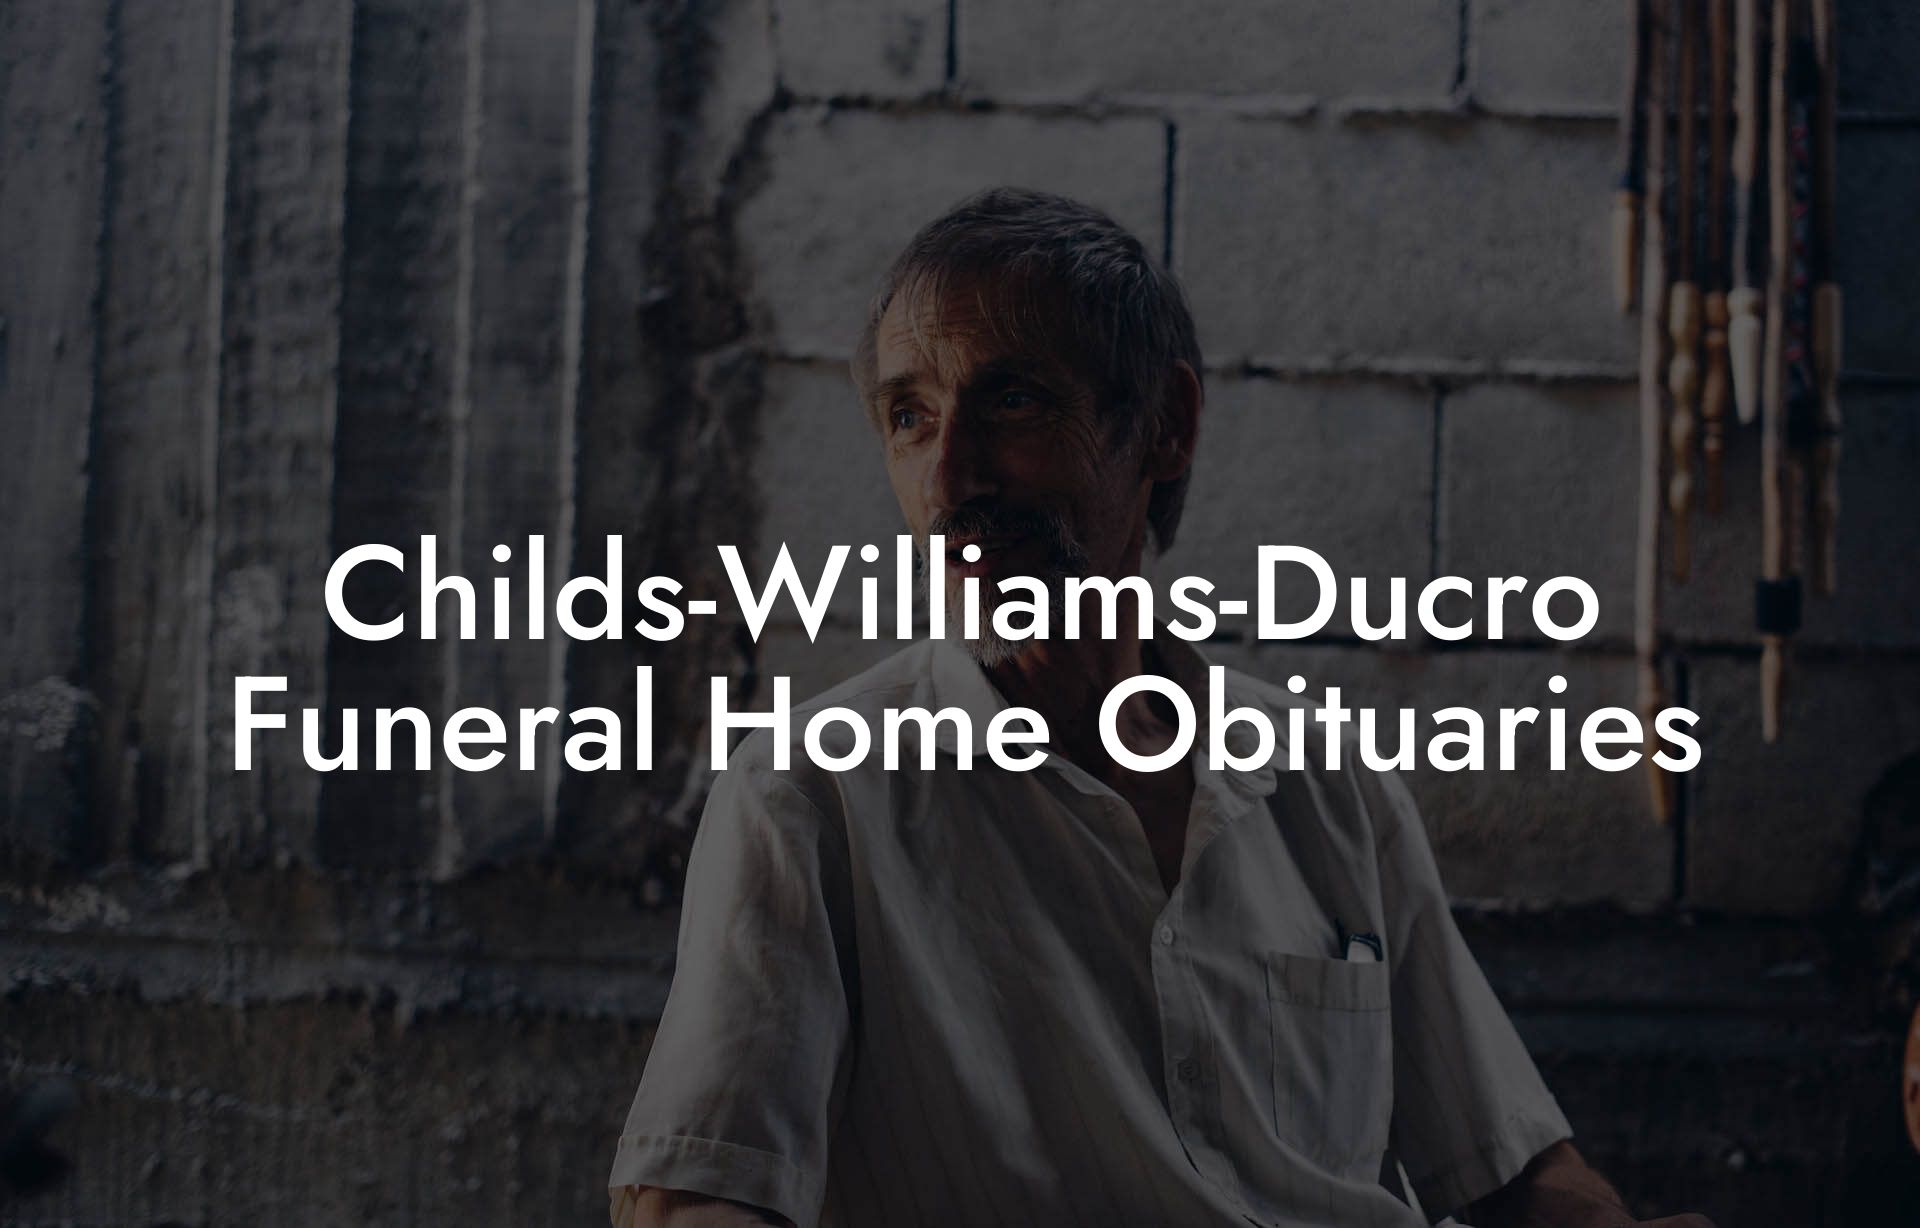 Childs-Williams-Ducro Funeral Home Obituaries